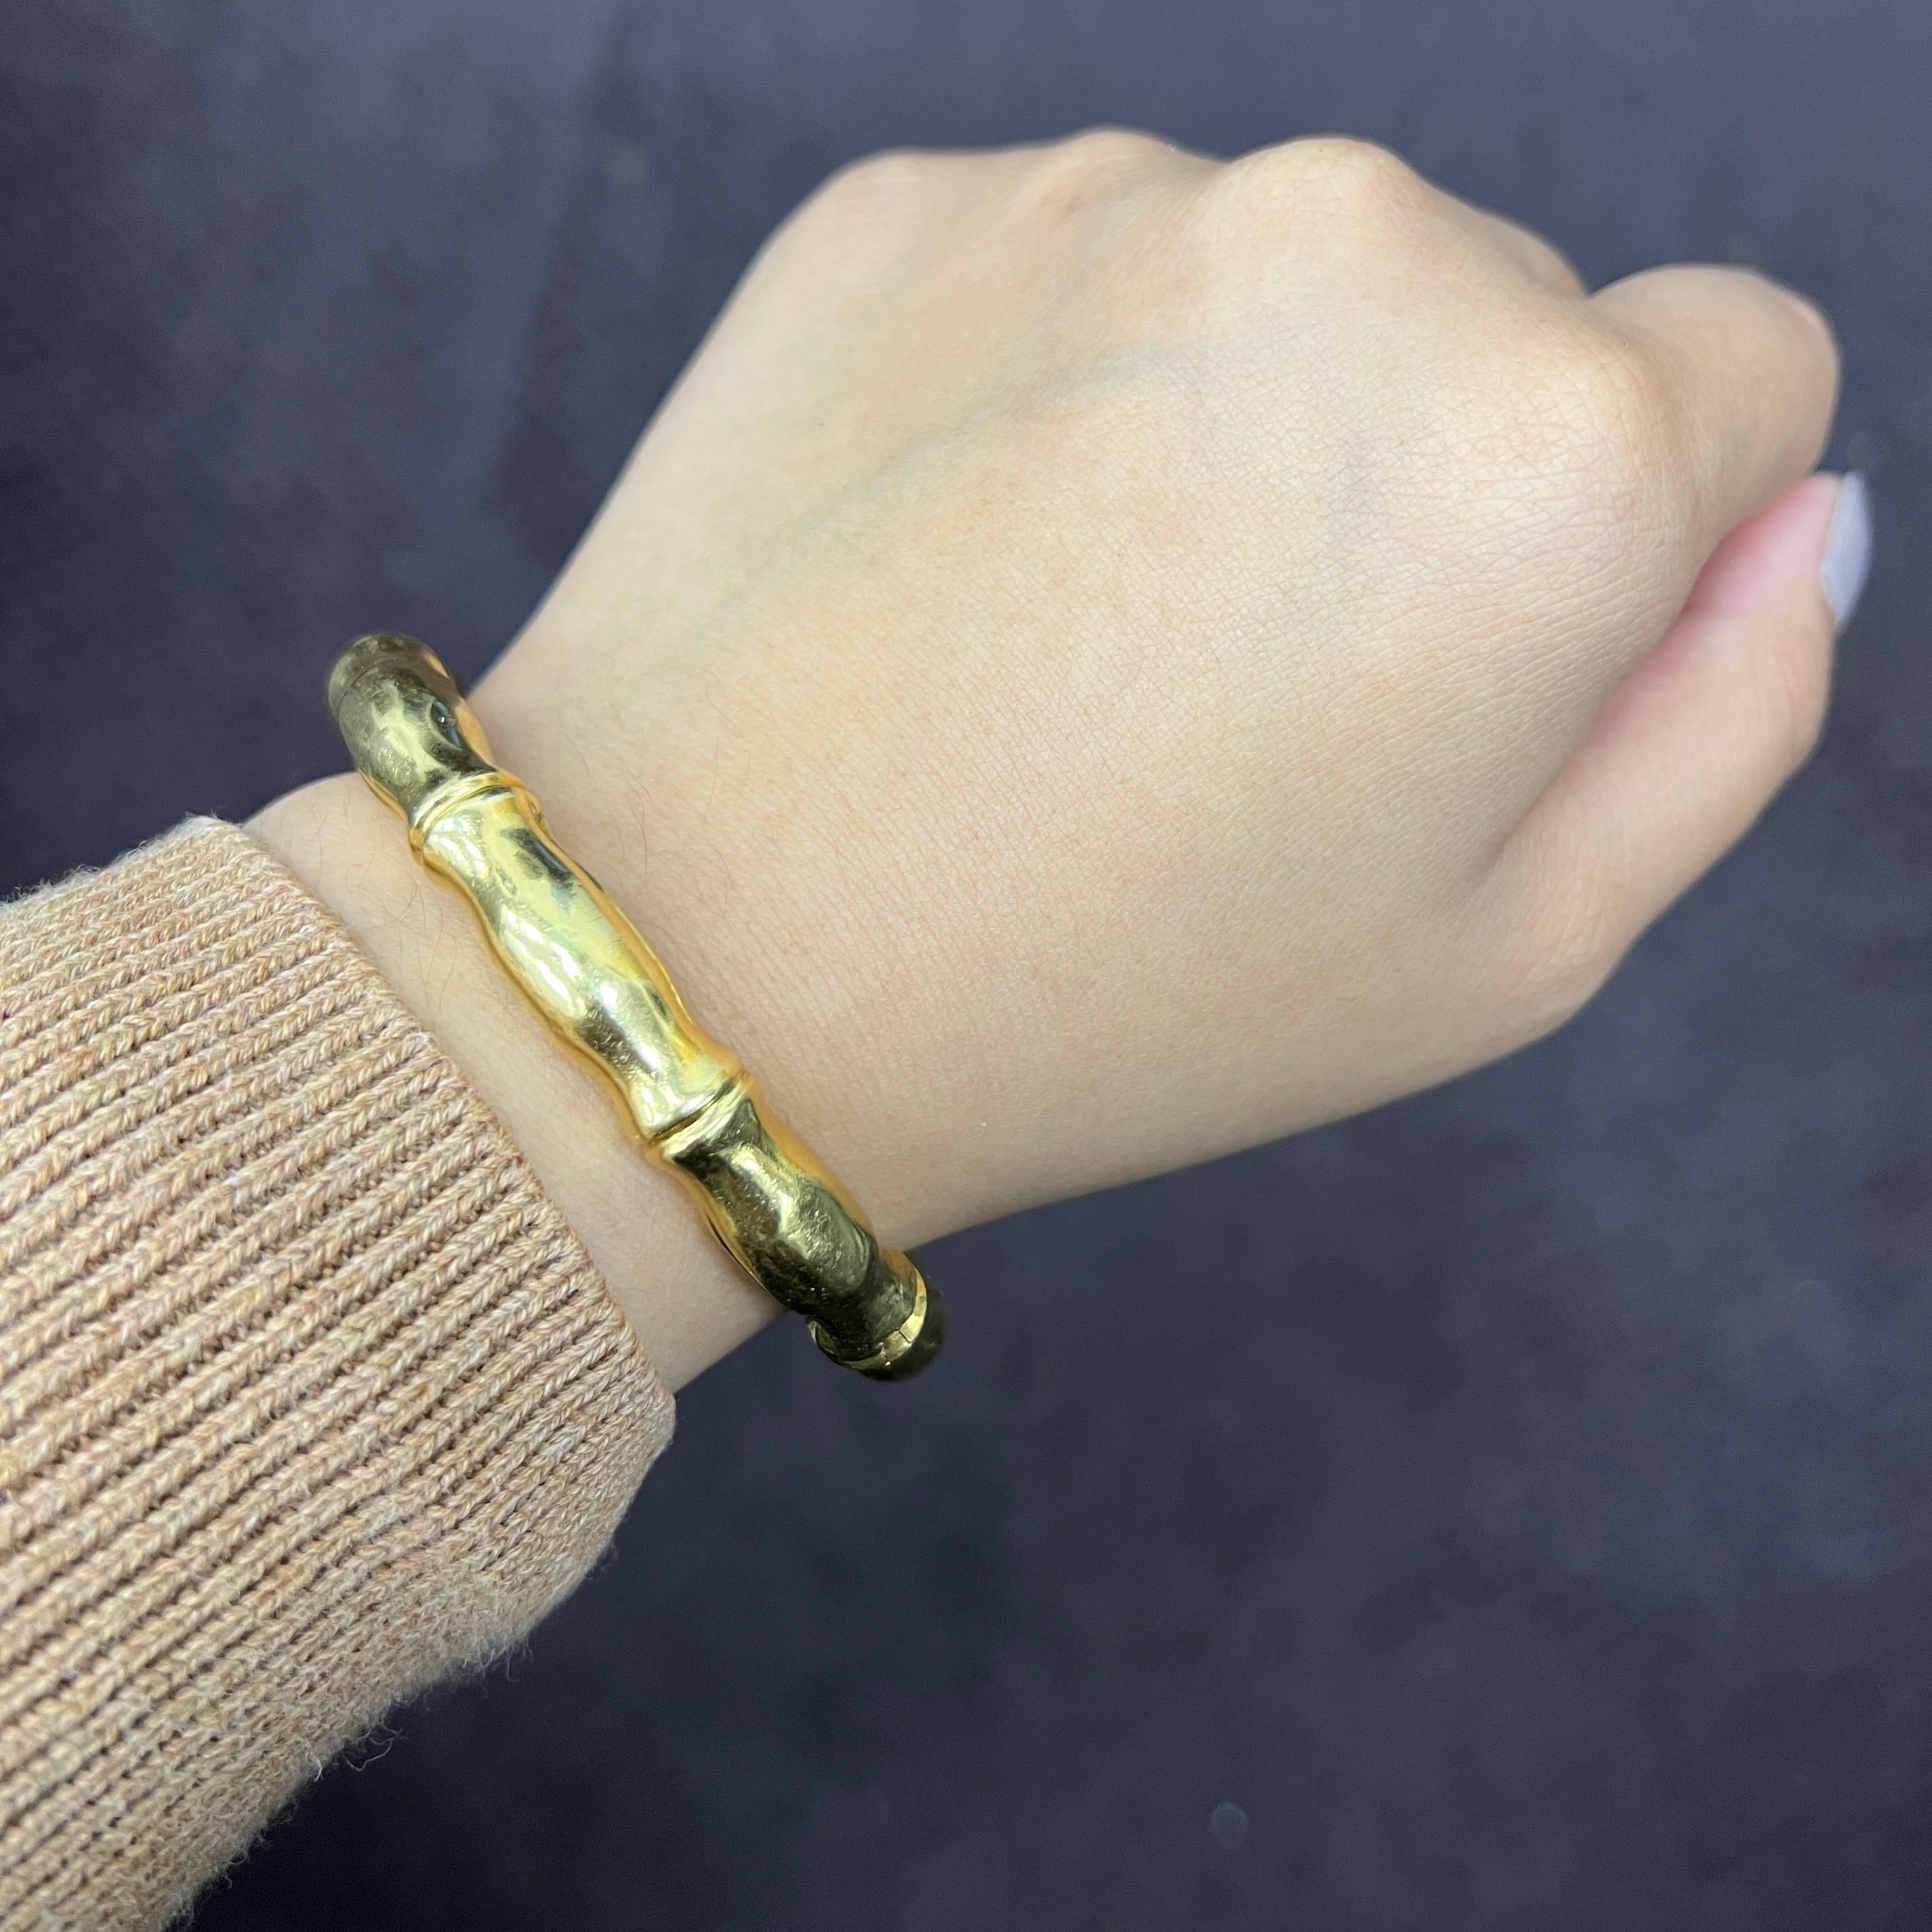 Tiffany & Co. Bamboo Gold Bangle Bracelet In Excellent Condition For Sale In New York, NY